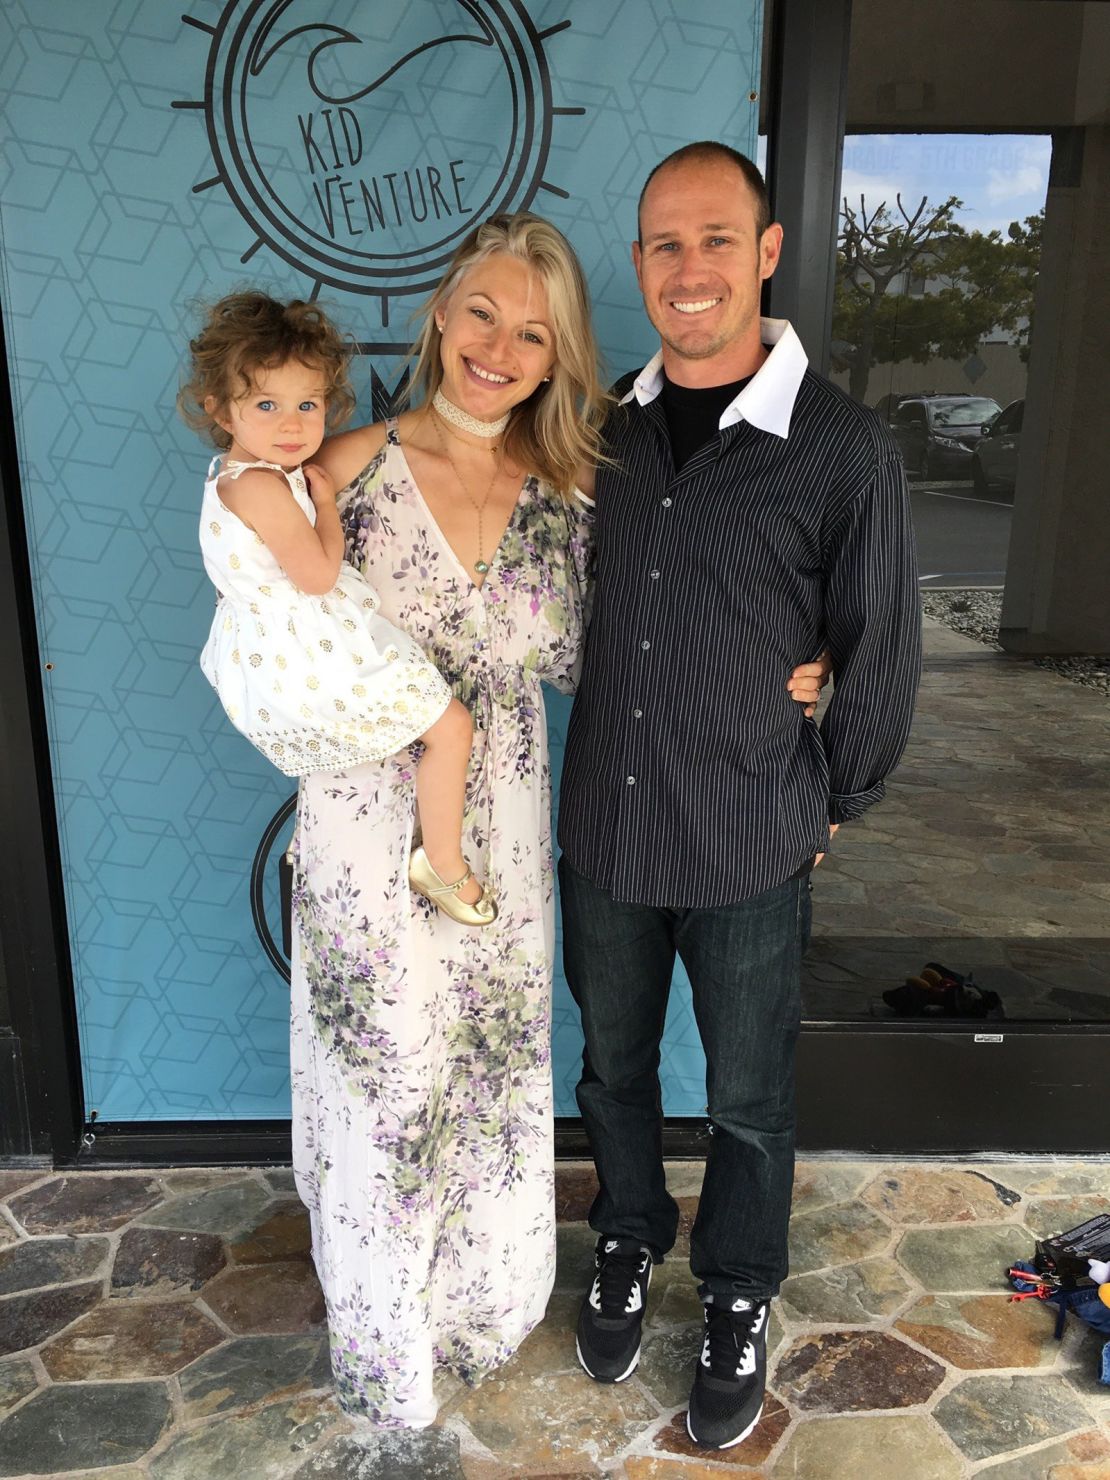 Cal Fire engineer Cory Iverson died while fighting the Thomas Fire in Ventura County. He leaves behind his pregnant wife, Ashley, and toddler daughter Evie.